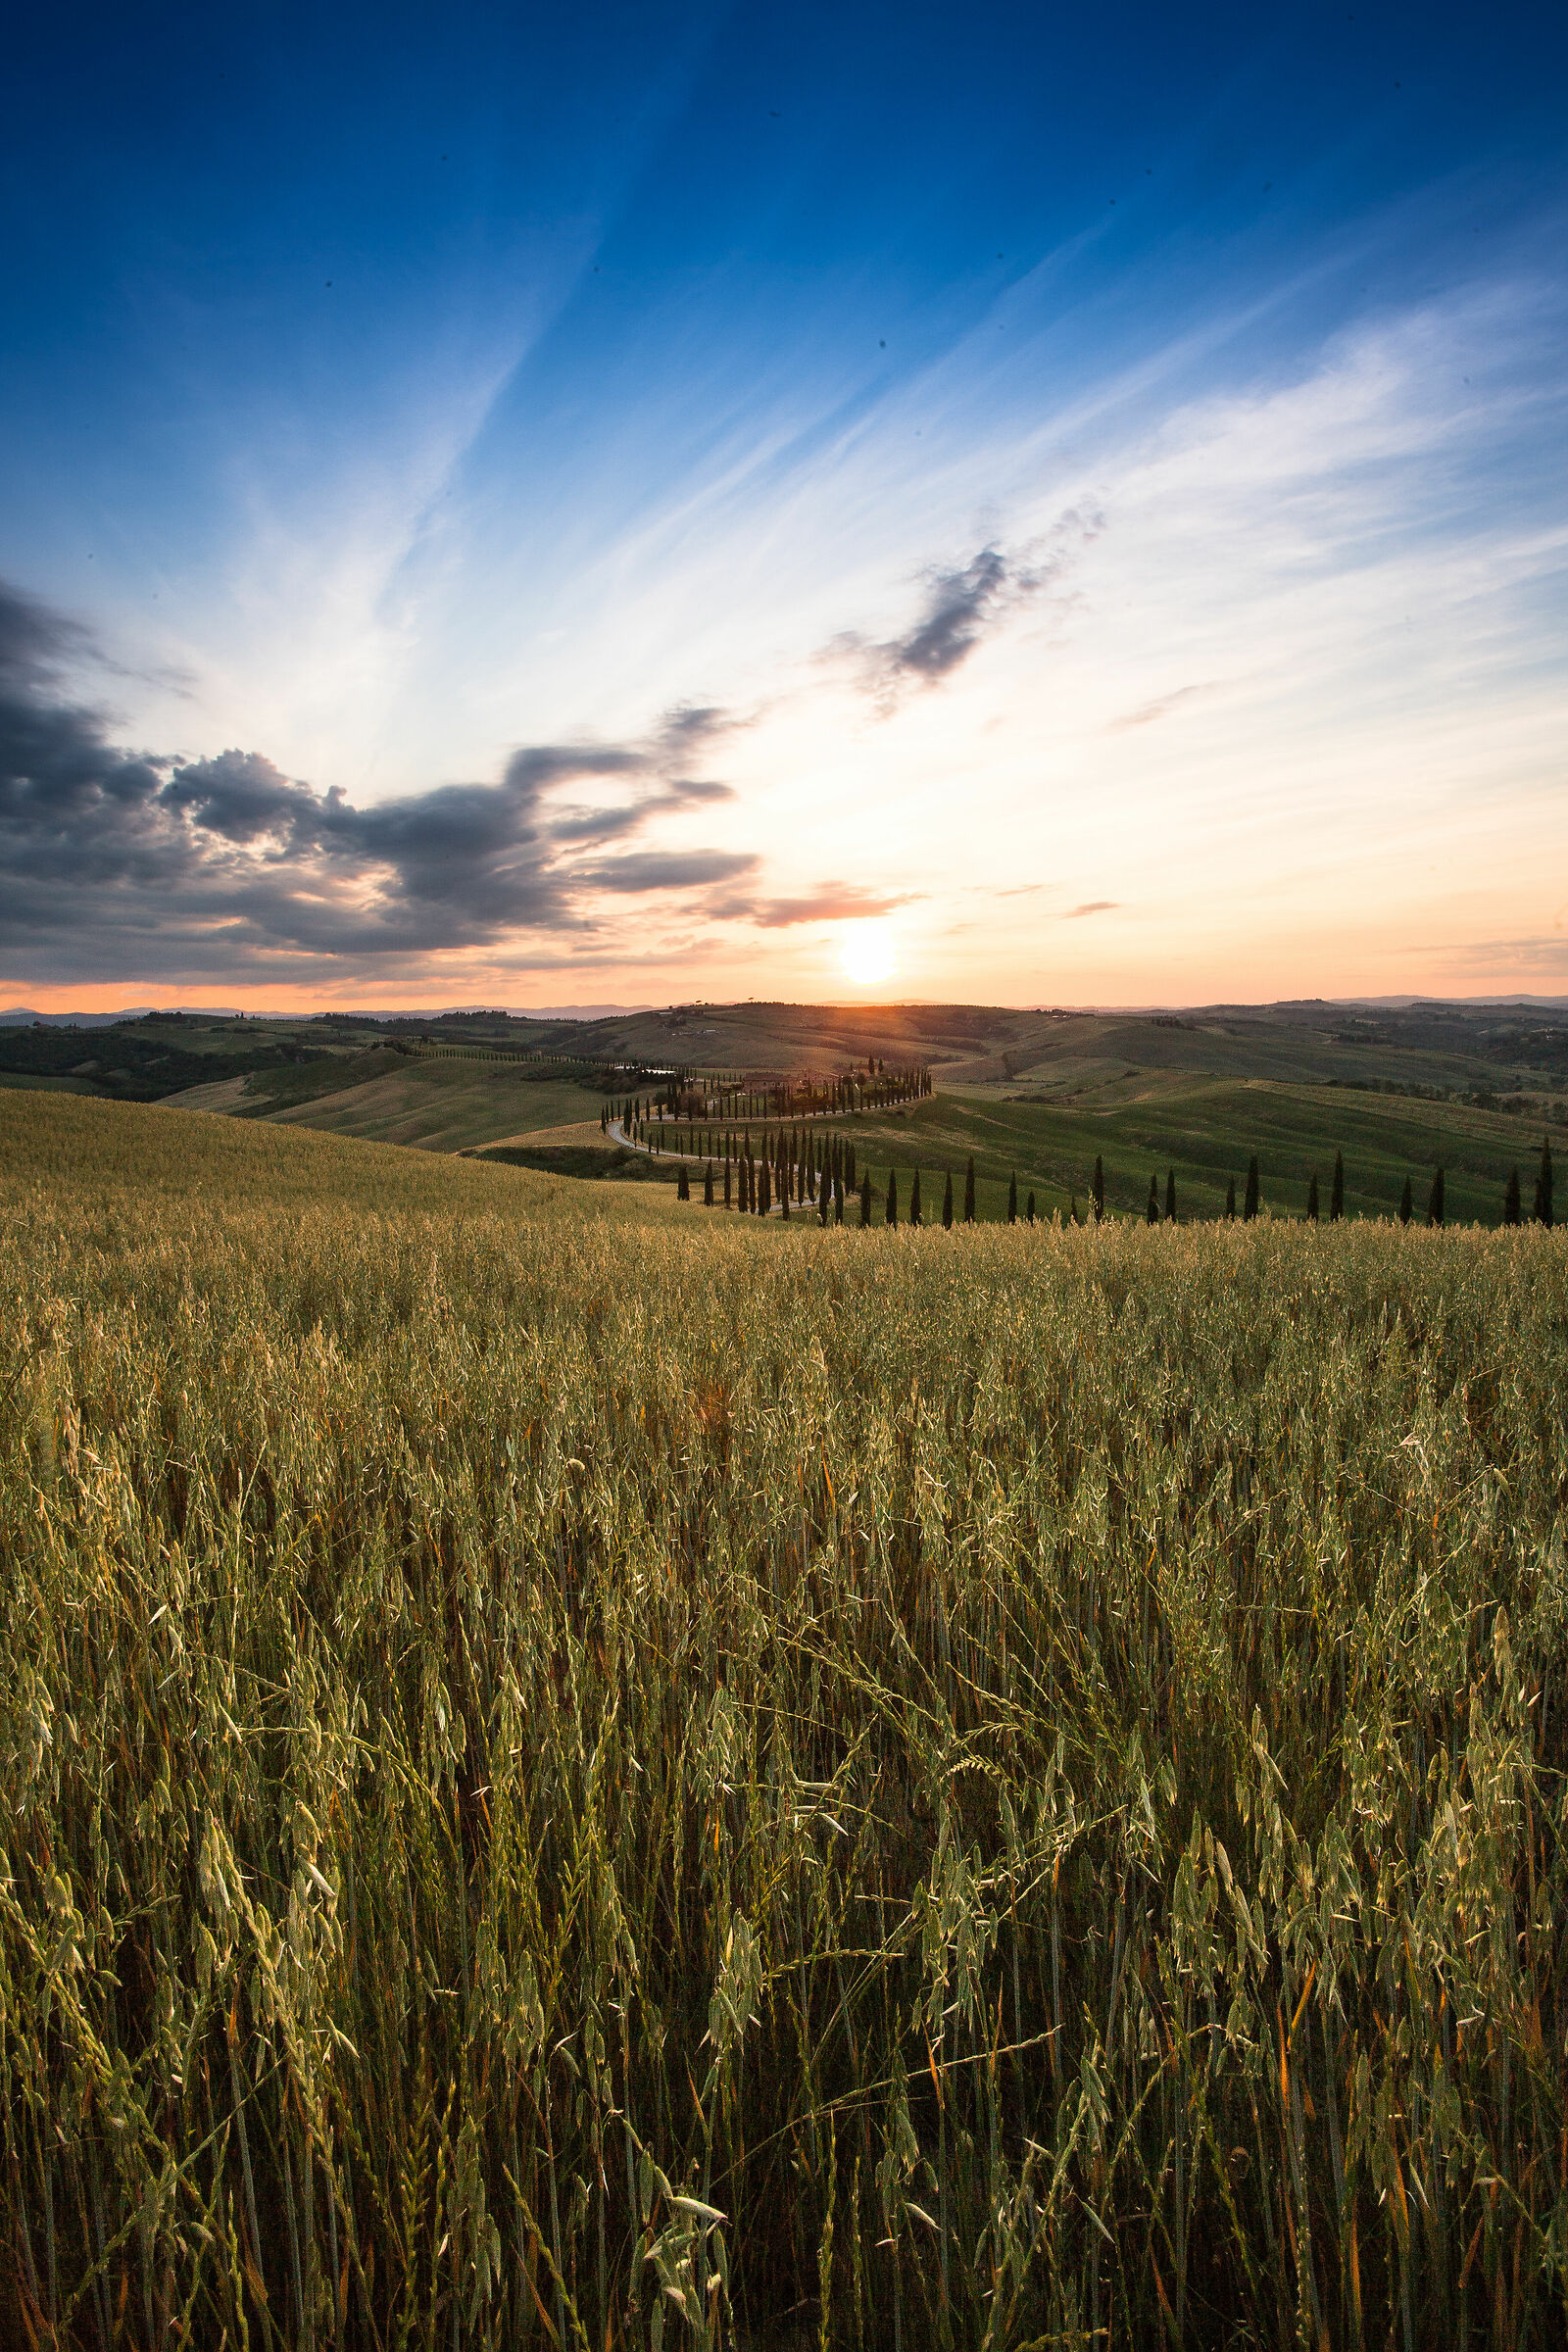 Sunset in the Siena countryside...